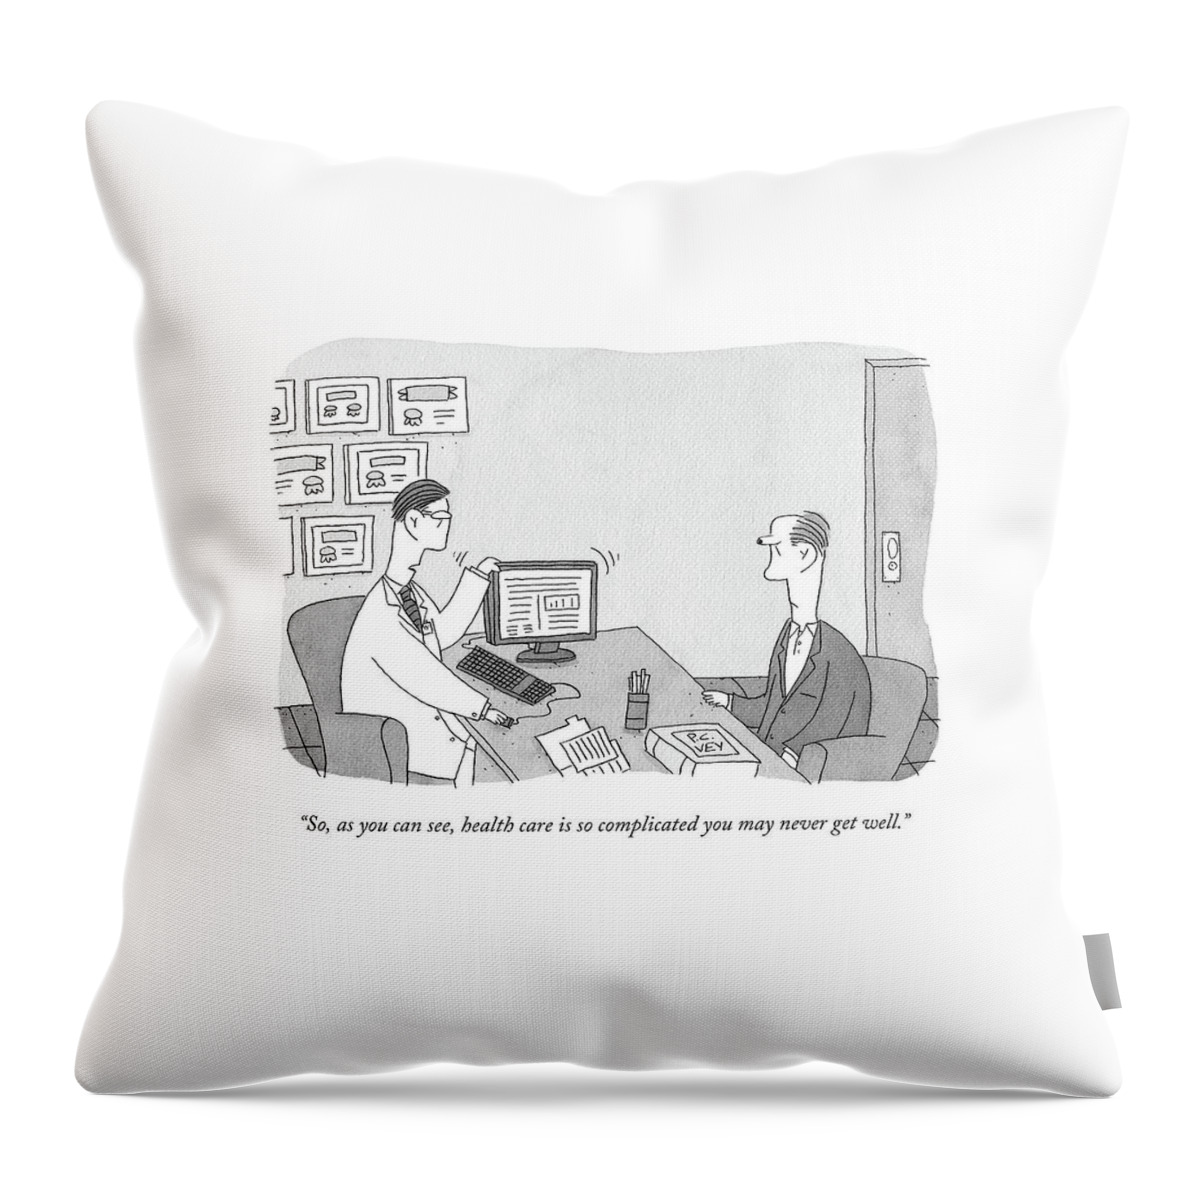 So, As You Can See, Health Care Is So Complicated Throw Pillow